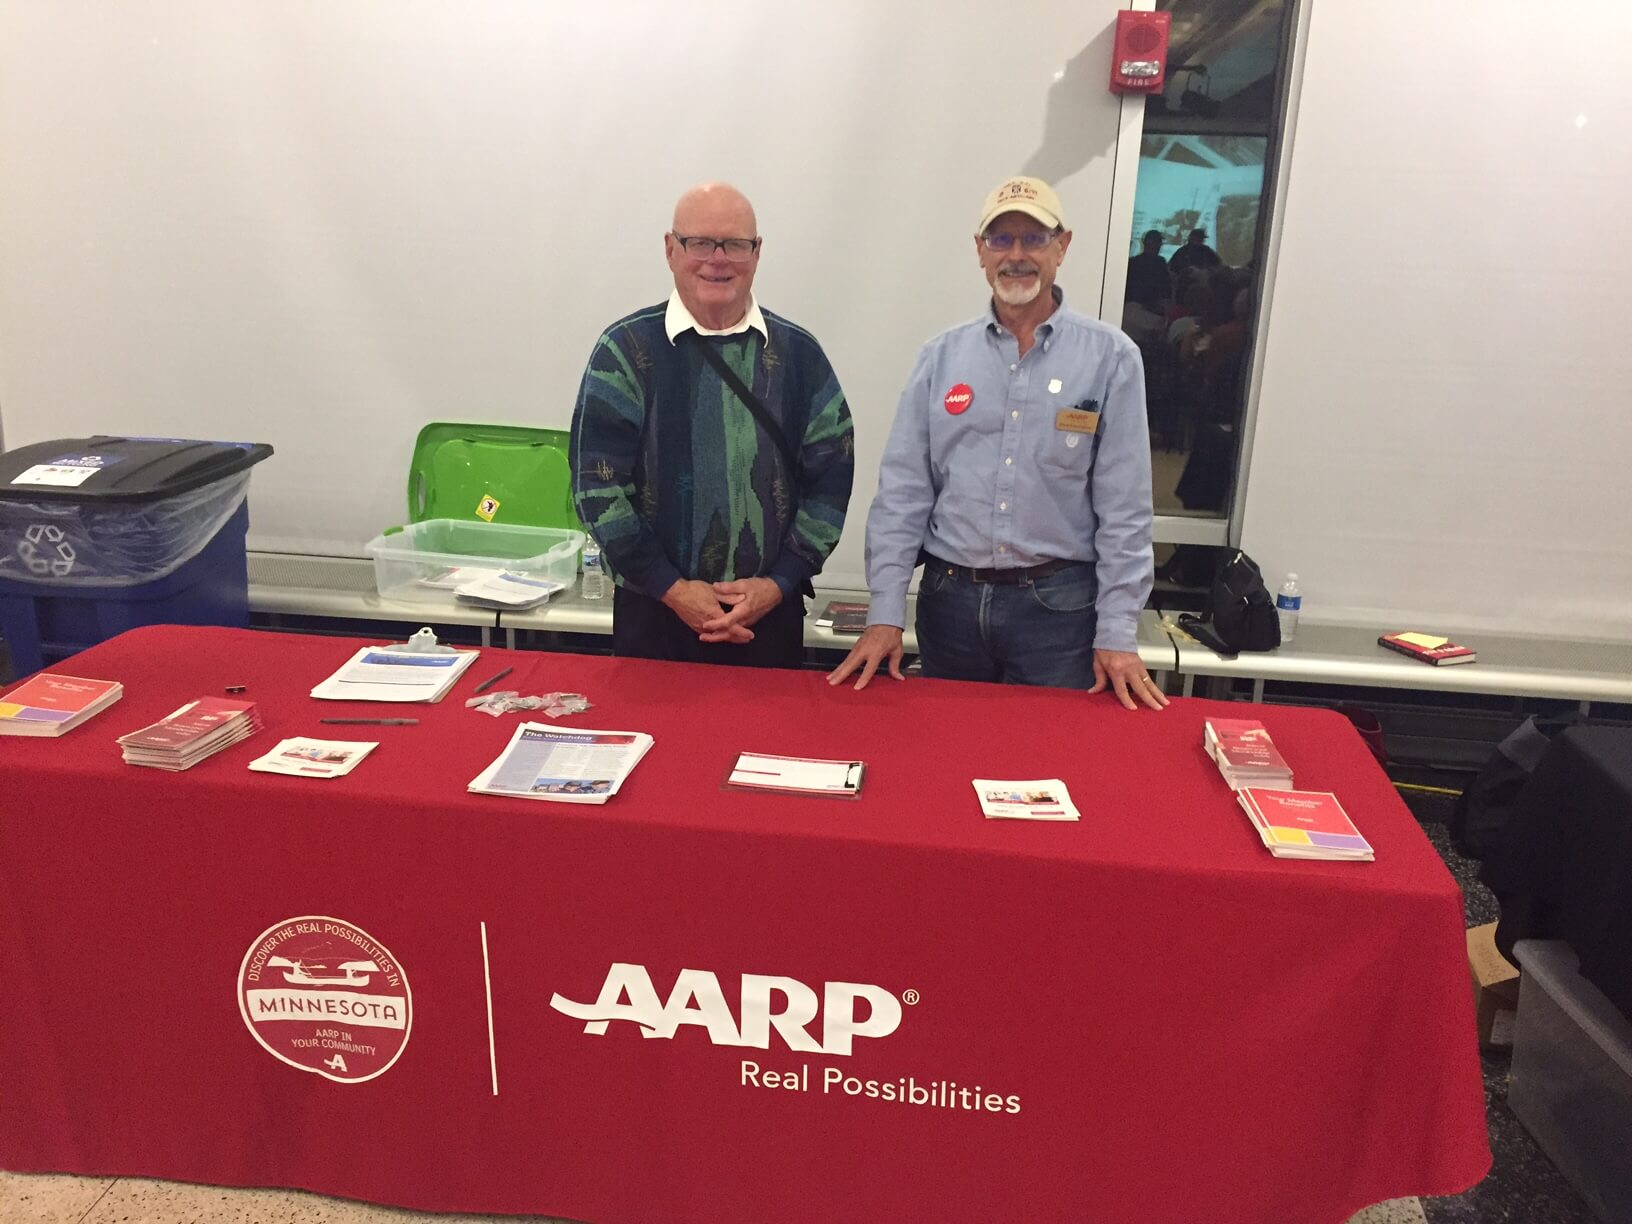 Two men standing behind a red AARP table at an event